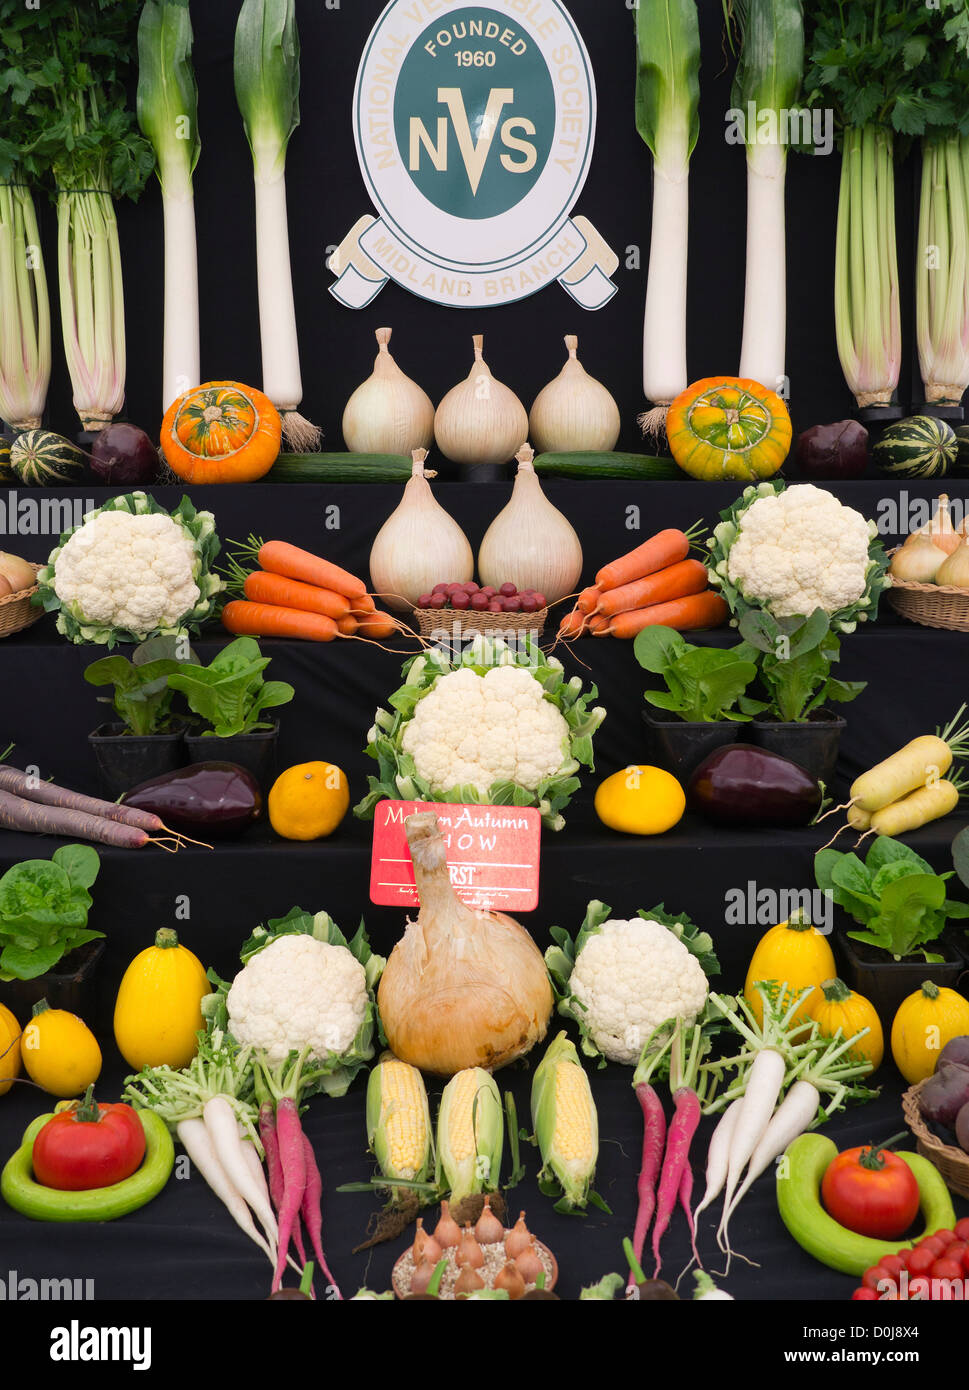 First prize in the vegetables display category at Malvern autumn show. Stock Photo